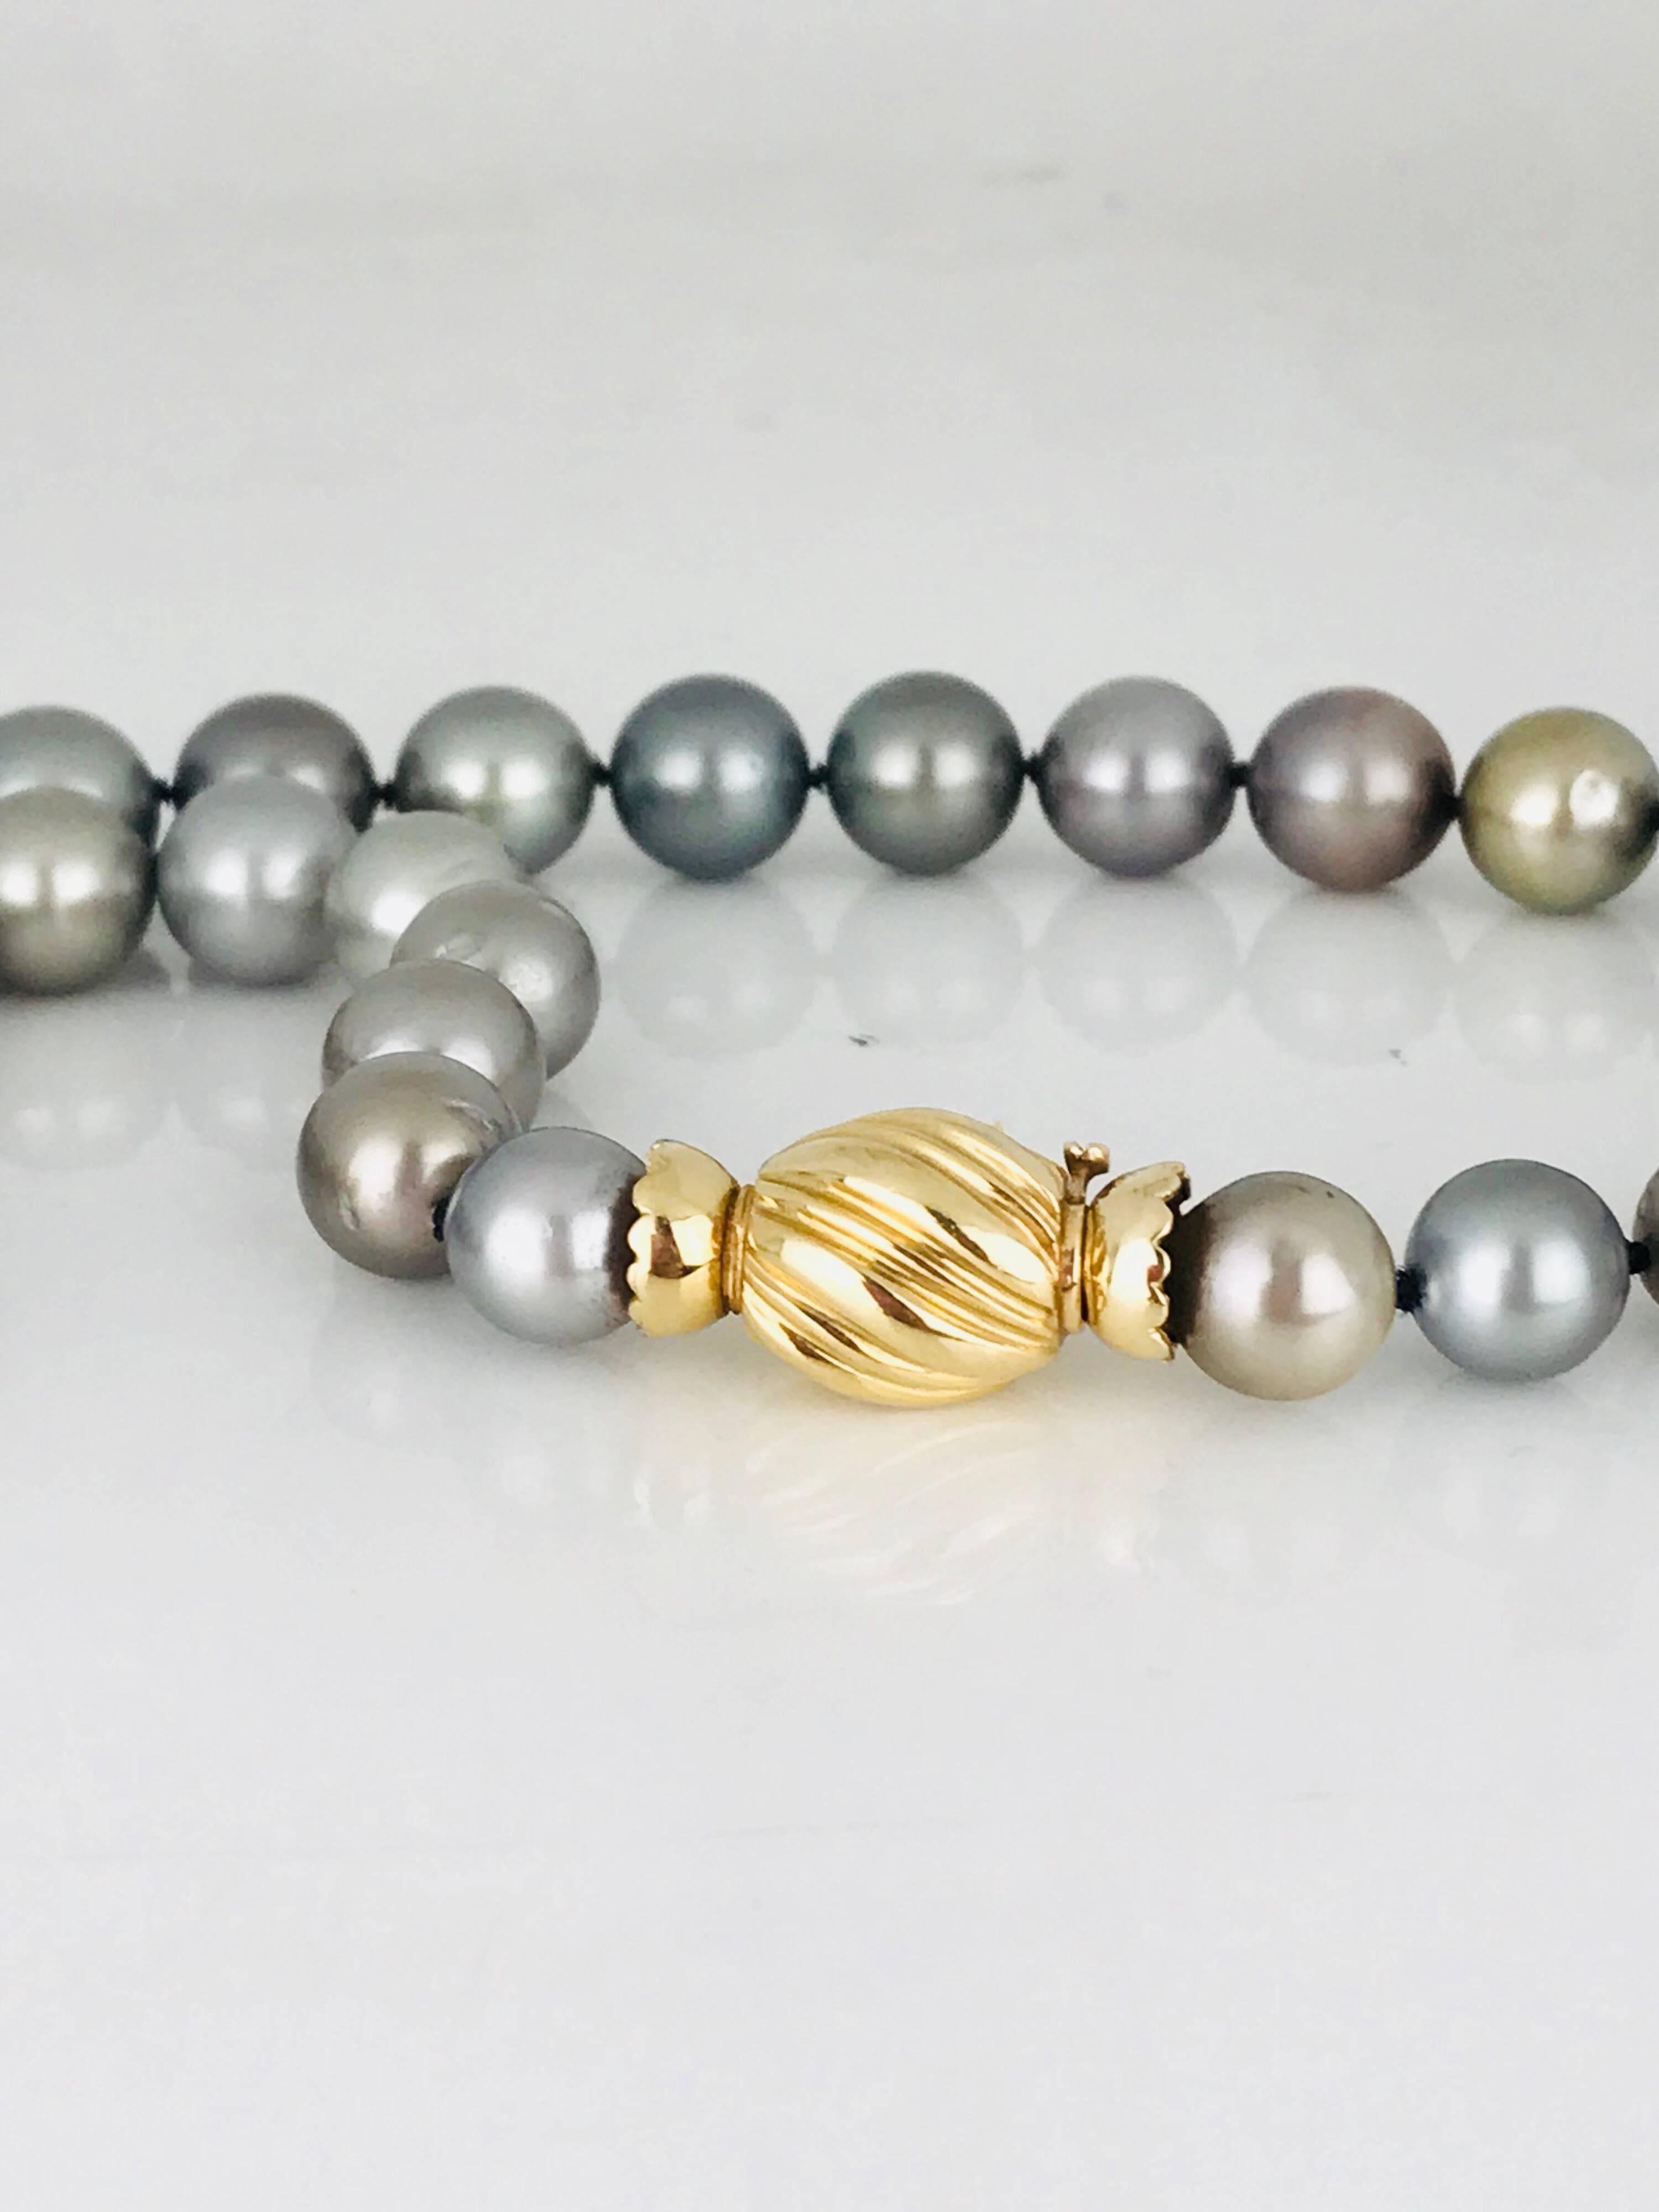 One strand of Tahitian Gray pearls measuring 7-1/4 inches in length. The pearls graduate from 11.66 millimeters to 9.15 millimeters, center. 

A total of 37 pearls are rounded with minor, imperfections. The color is gray with a slight variation, and